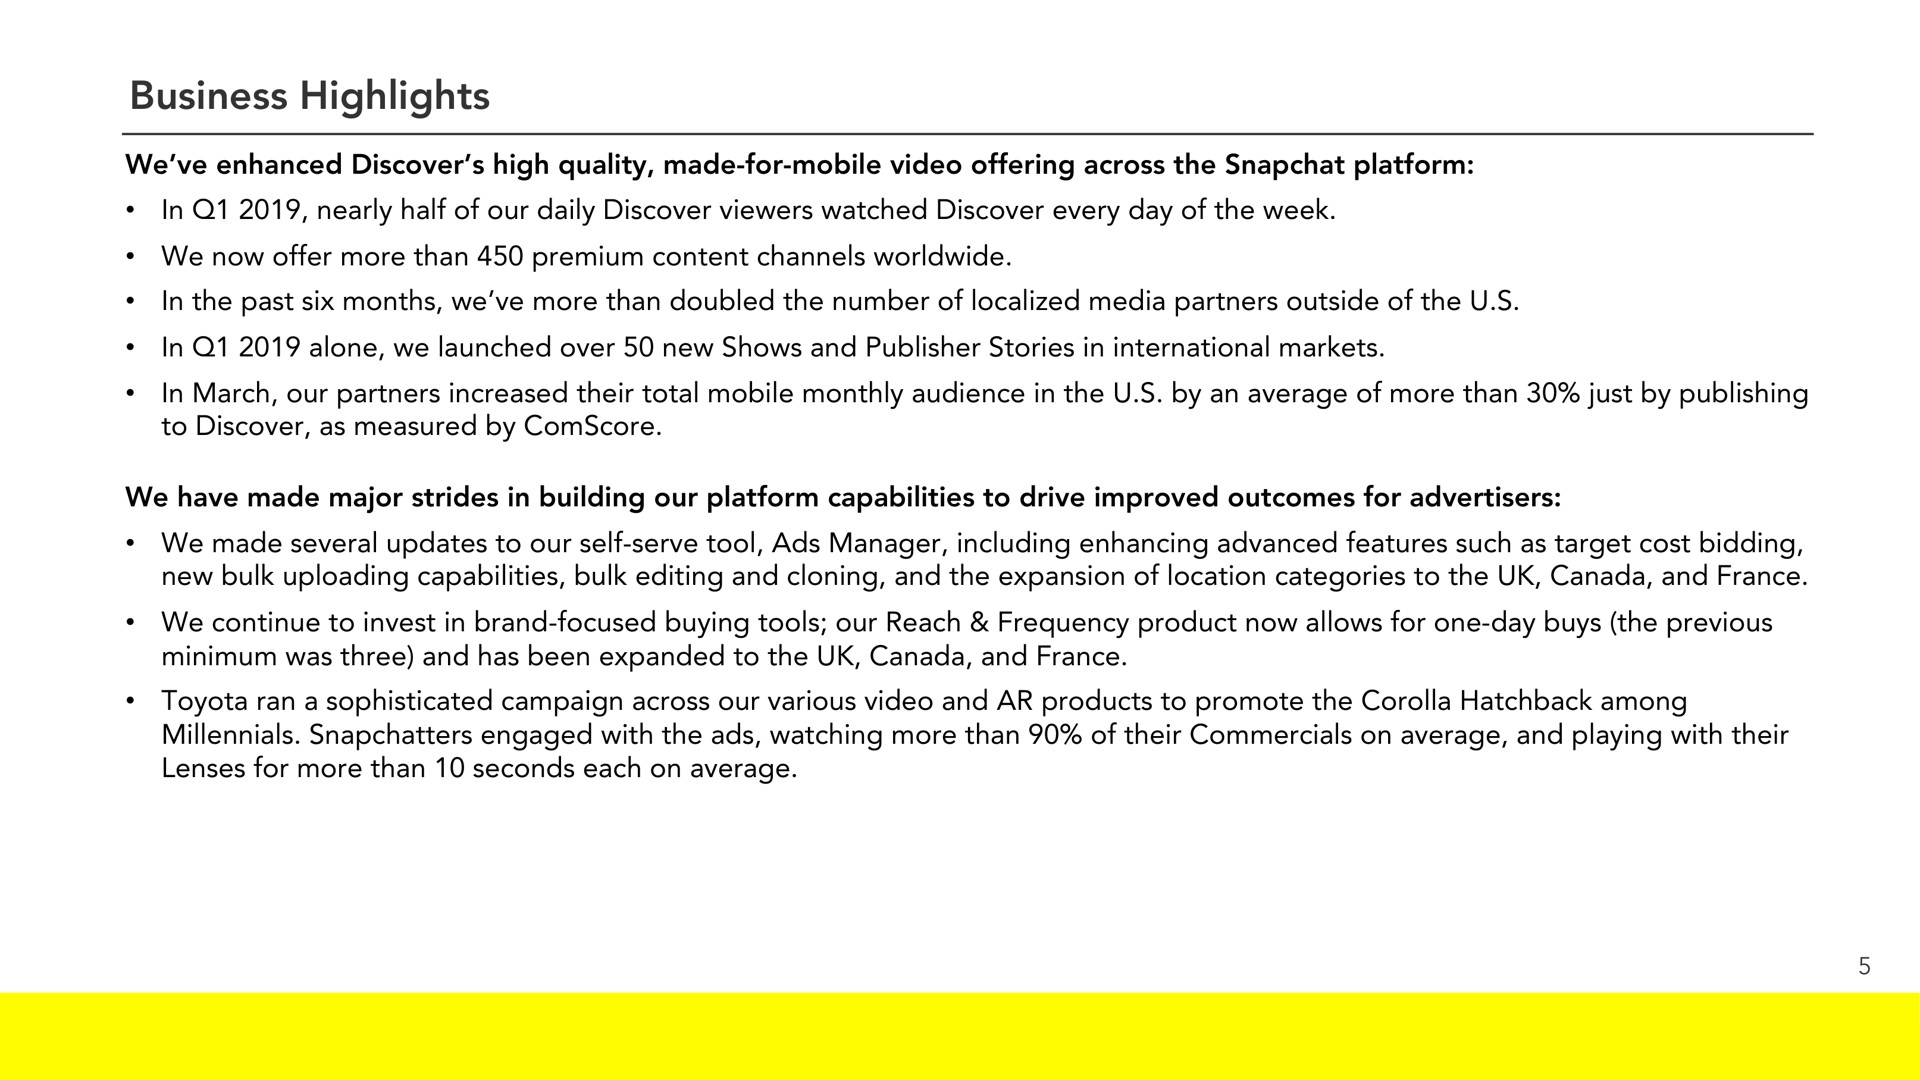 business highlights we enhanced discover high quality made for mobile video offering across the platform in nearly half of our daily discover viewers watched discover every day of the week we now offer more than premium content channels in the past six months we more than doubled the number of localized media partners outside of the in alone we launched over new shows and publisher stories in international markets in march our partners increased their total mobile monthly audience in the by an average of more than just by publishing to discover as measured by we have made major strides in building our platform capabilities to drive improved outcomes for advertisers we made several updates to our self serve tool ads manager including enhancing advanced features such as target cost bidding new bulk capabilities bulk editing and cloning and the expansion of location categories to the canada and we continue to invest in brand focused buying tools our reach frequency product now allows for one day buys the previous minimum was three and has been expanded to the canada and ran a sophisticated campaign across our various video and products to promote the corolla among engaged with the ads watching more than of their commercials on average and playing with their lenses for more than seconds each on average | Snap Inc